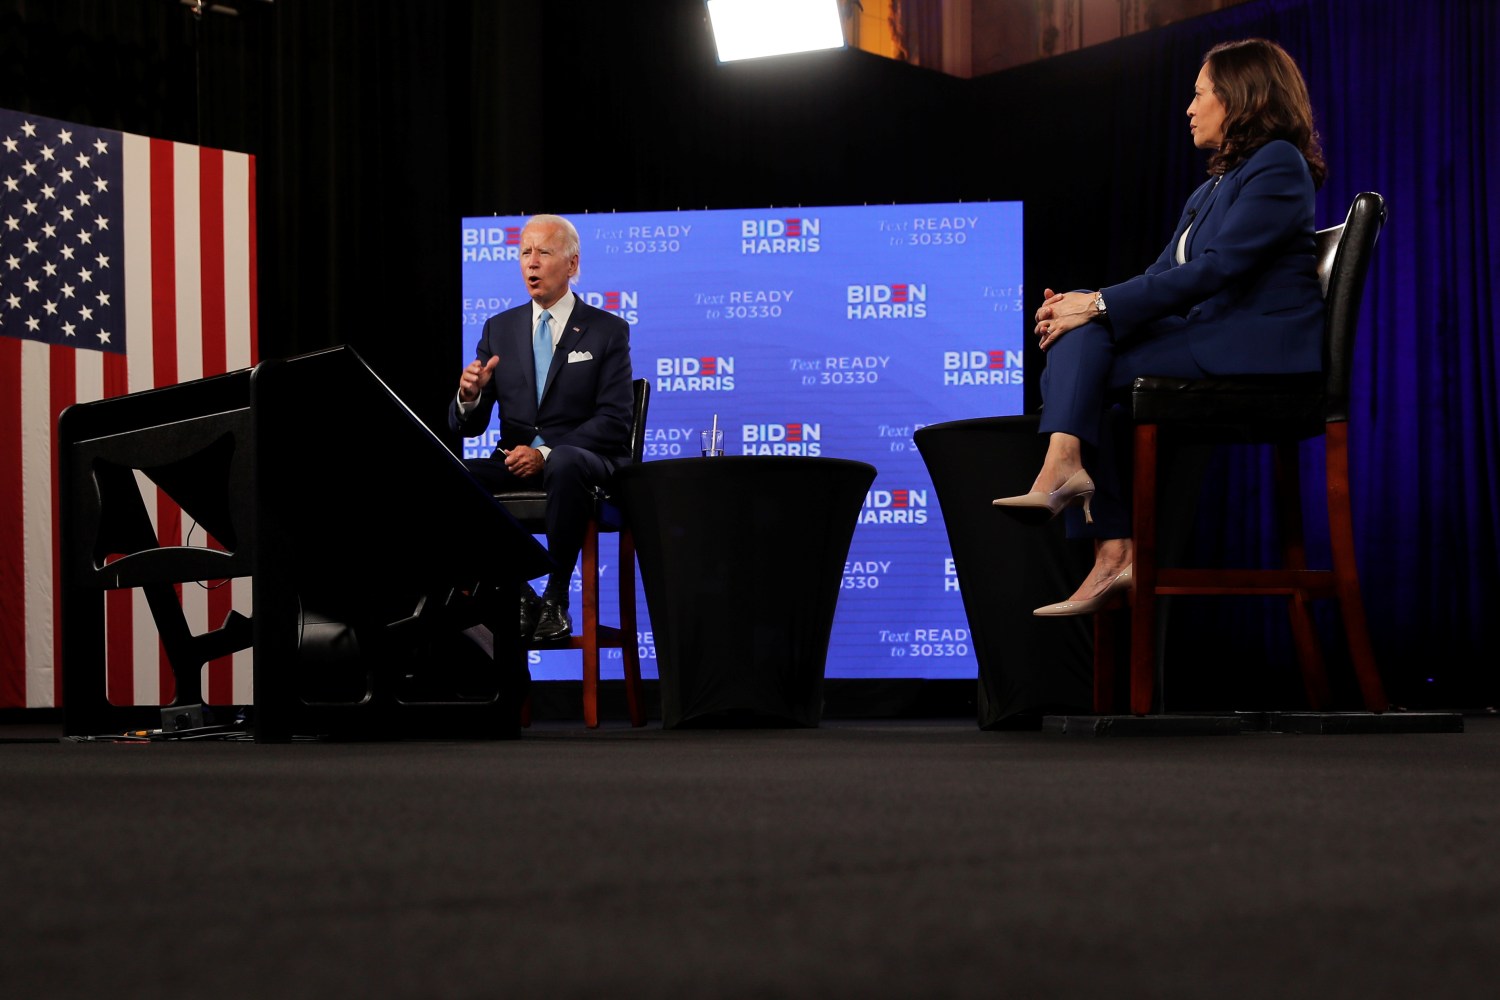 Democratic presidential candidate and former Vice President Joe Biden speaks during a virtual campaign fundraising event with vice presidential candidate Senator Kamala Harris in Wilmington, Delaware, U.S., August 12, 2020. REUTERS/Carlos Barria